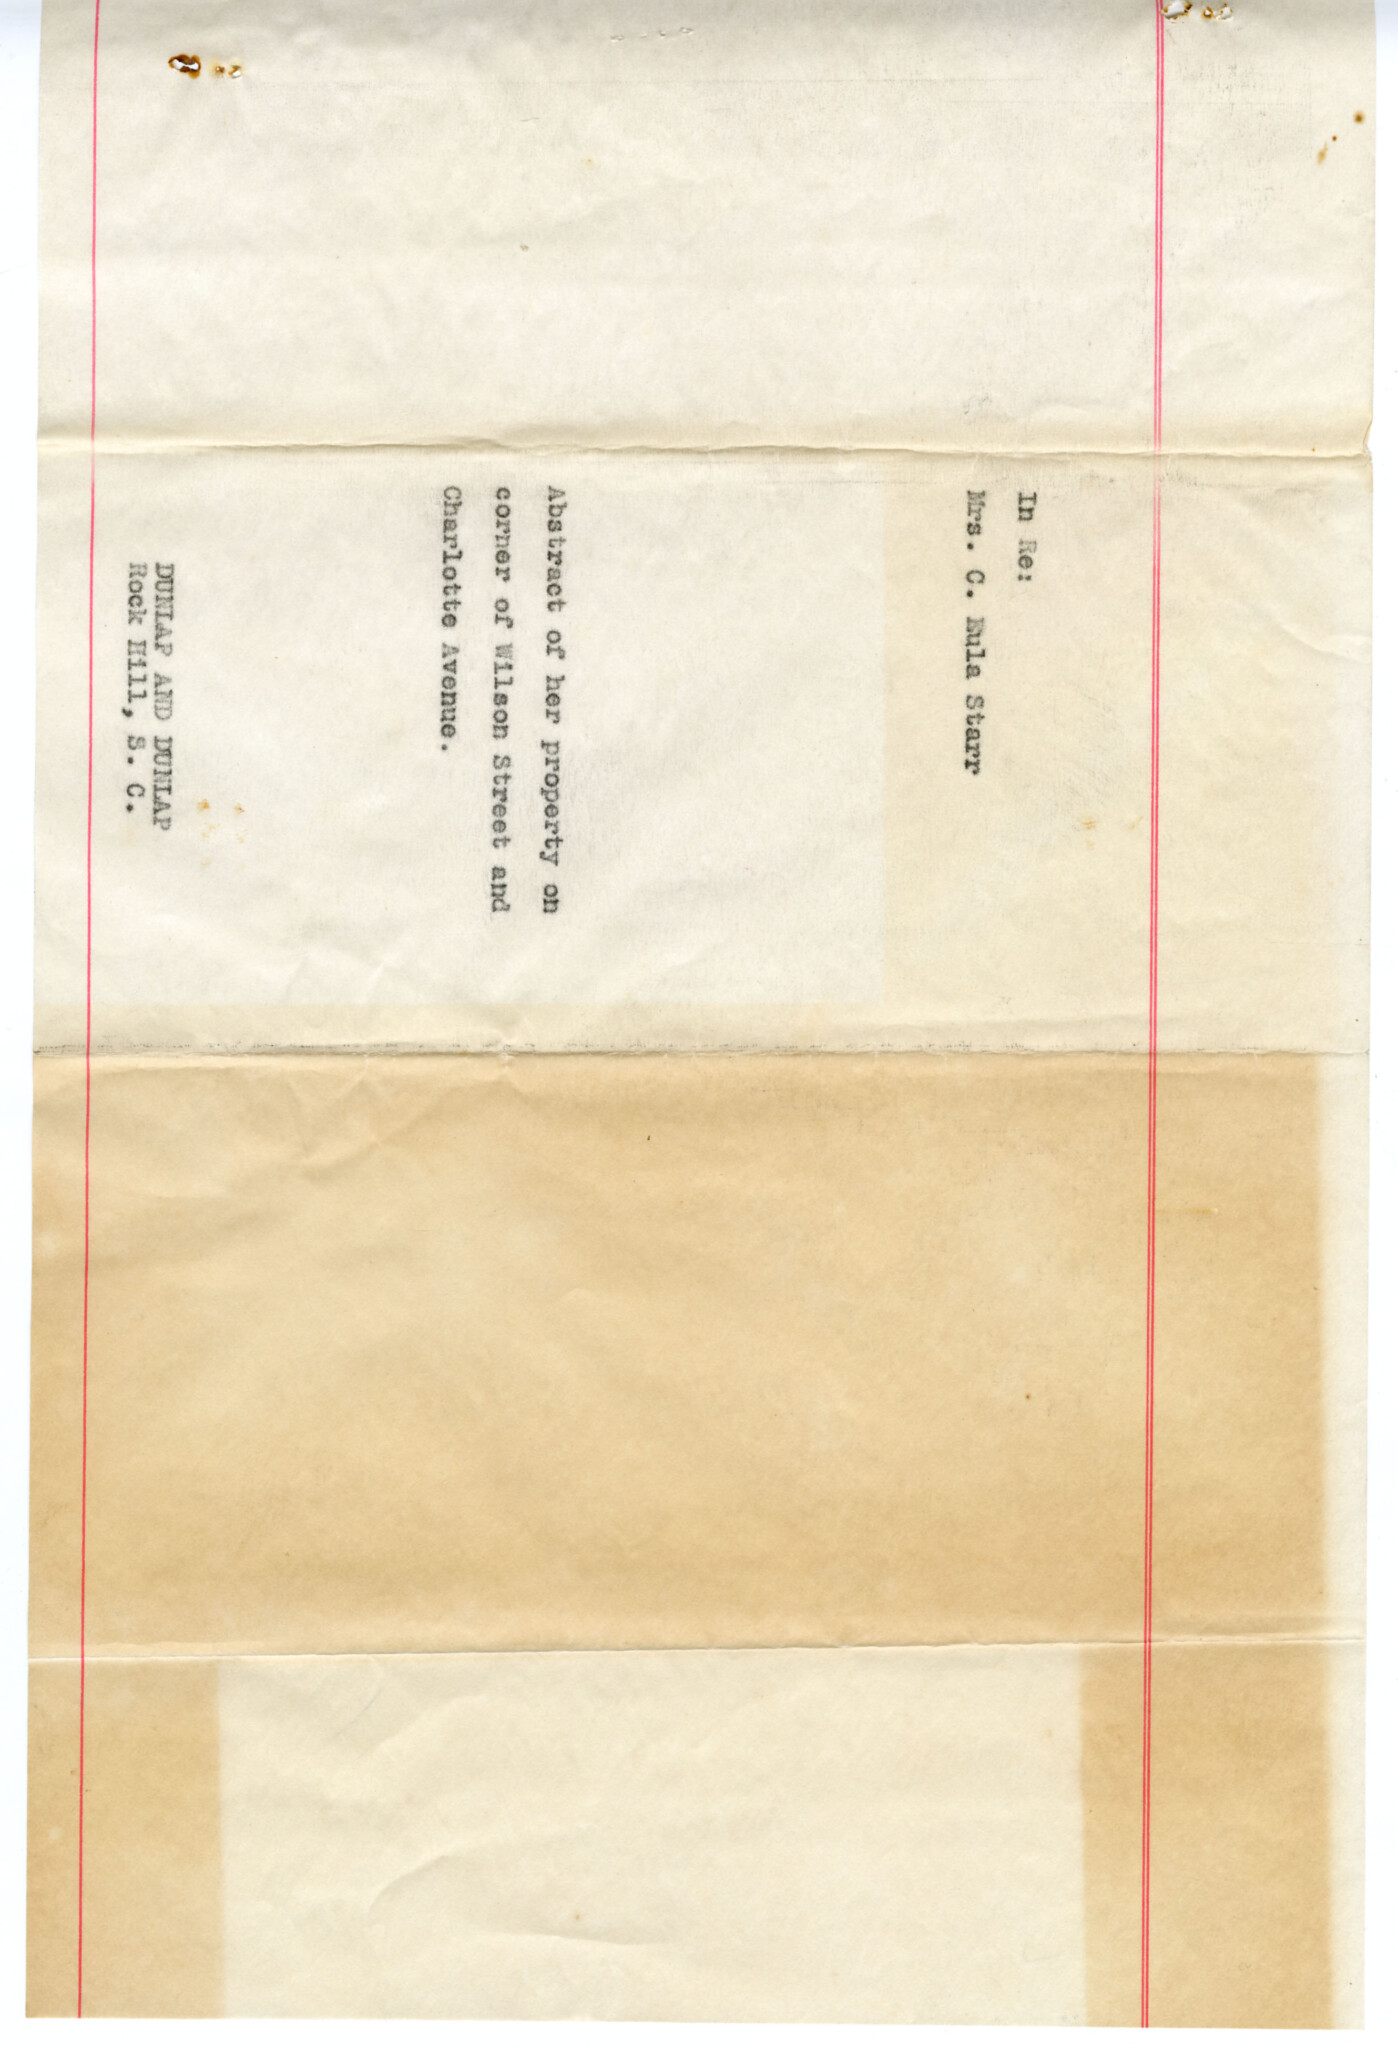 LEGAL DOCUMENTS RELATED TO THE IVY PROPERTY - P. 5  WU PETTUS ARCHIVES COLLECTION